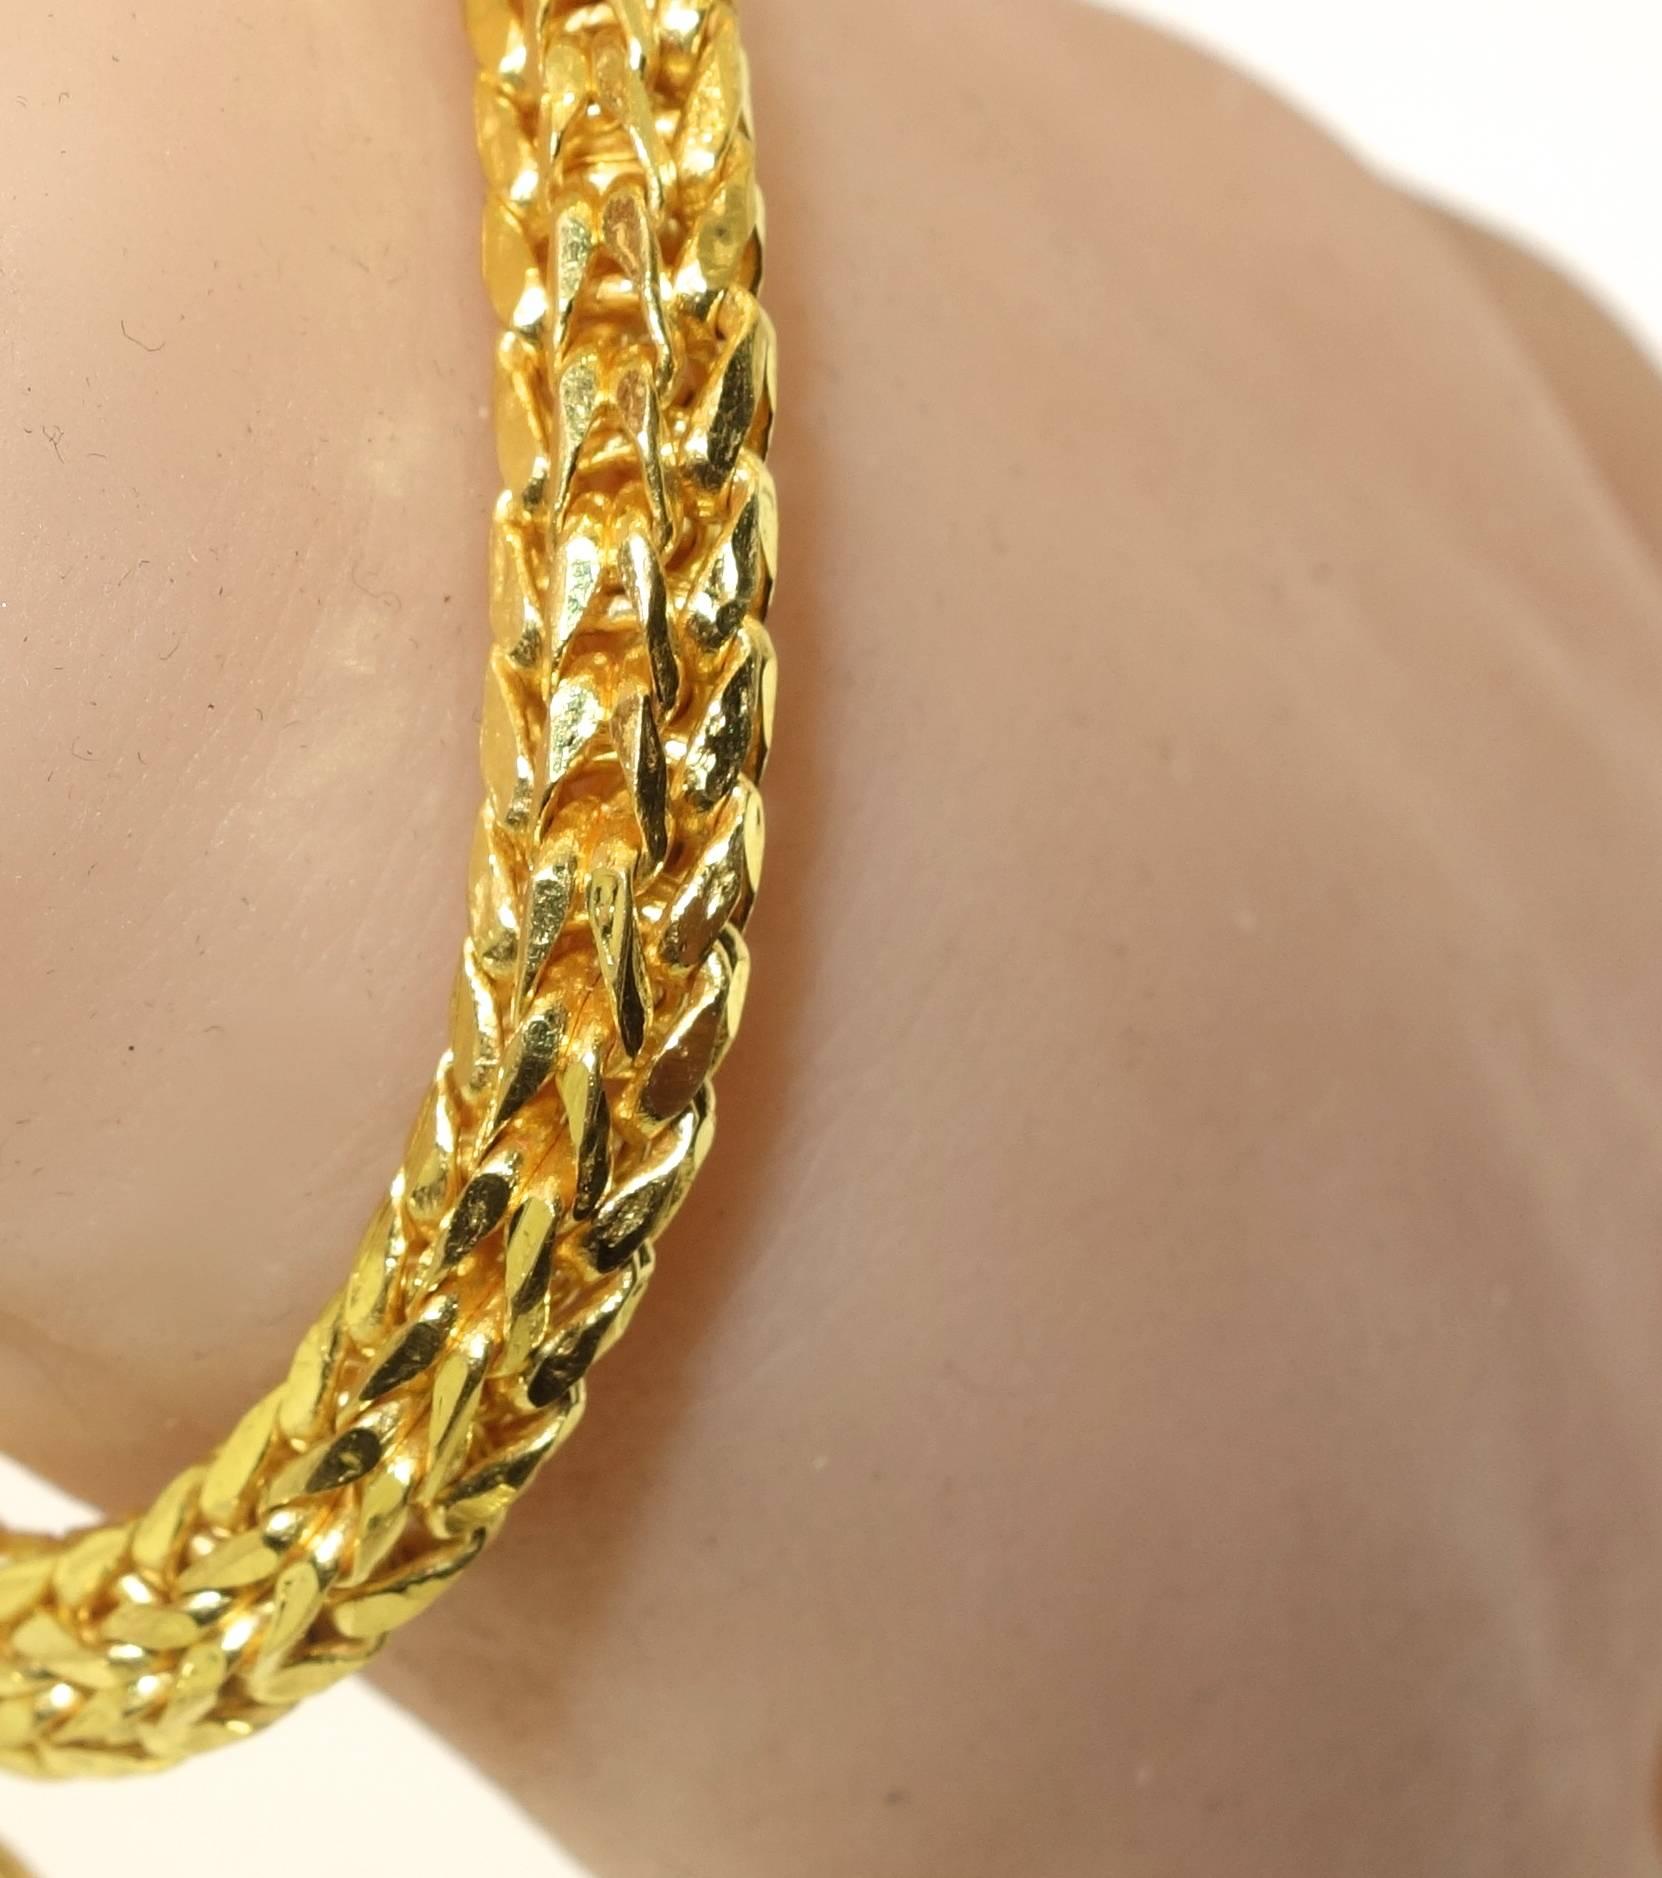 96.5% pure gold (marked as such on the inside), the bracelet is 7 inches long of finely braided gold terminating with a lovely heart shaped charm.  30.34 grams.  This bracelet has a gold scrap value of over $1200.